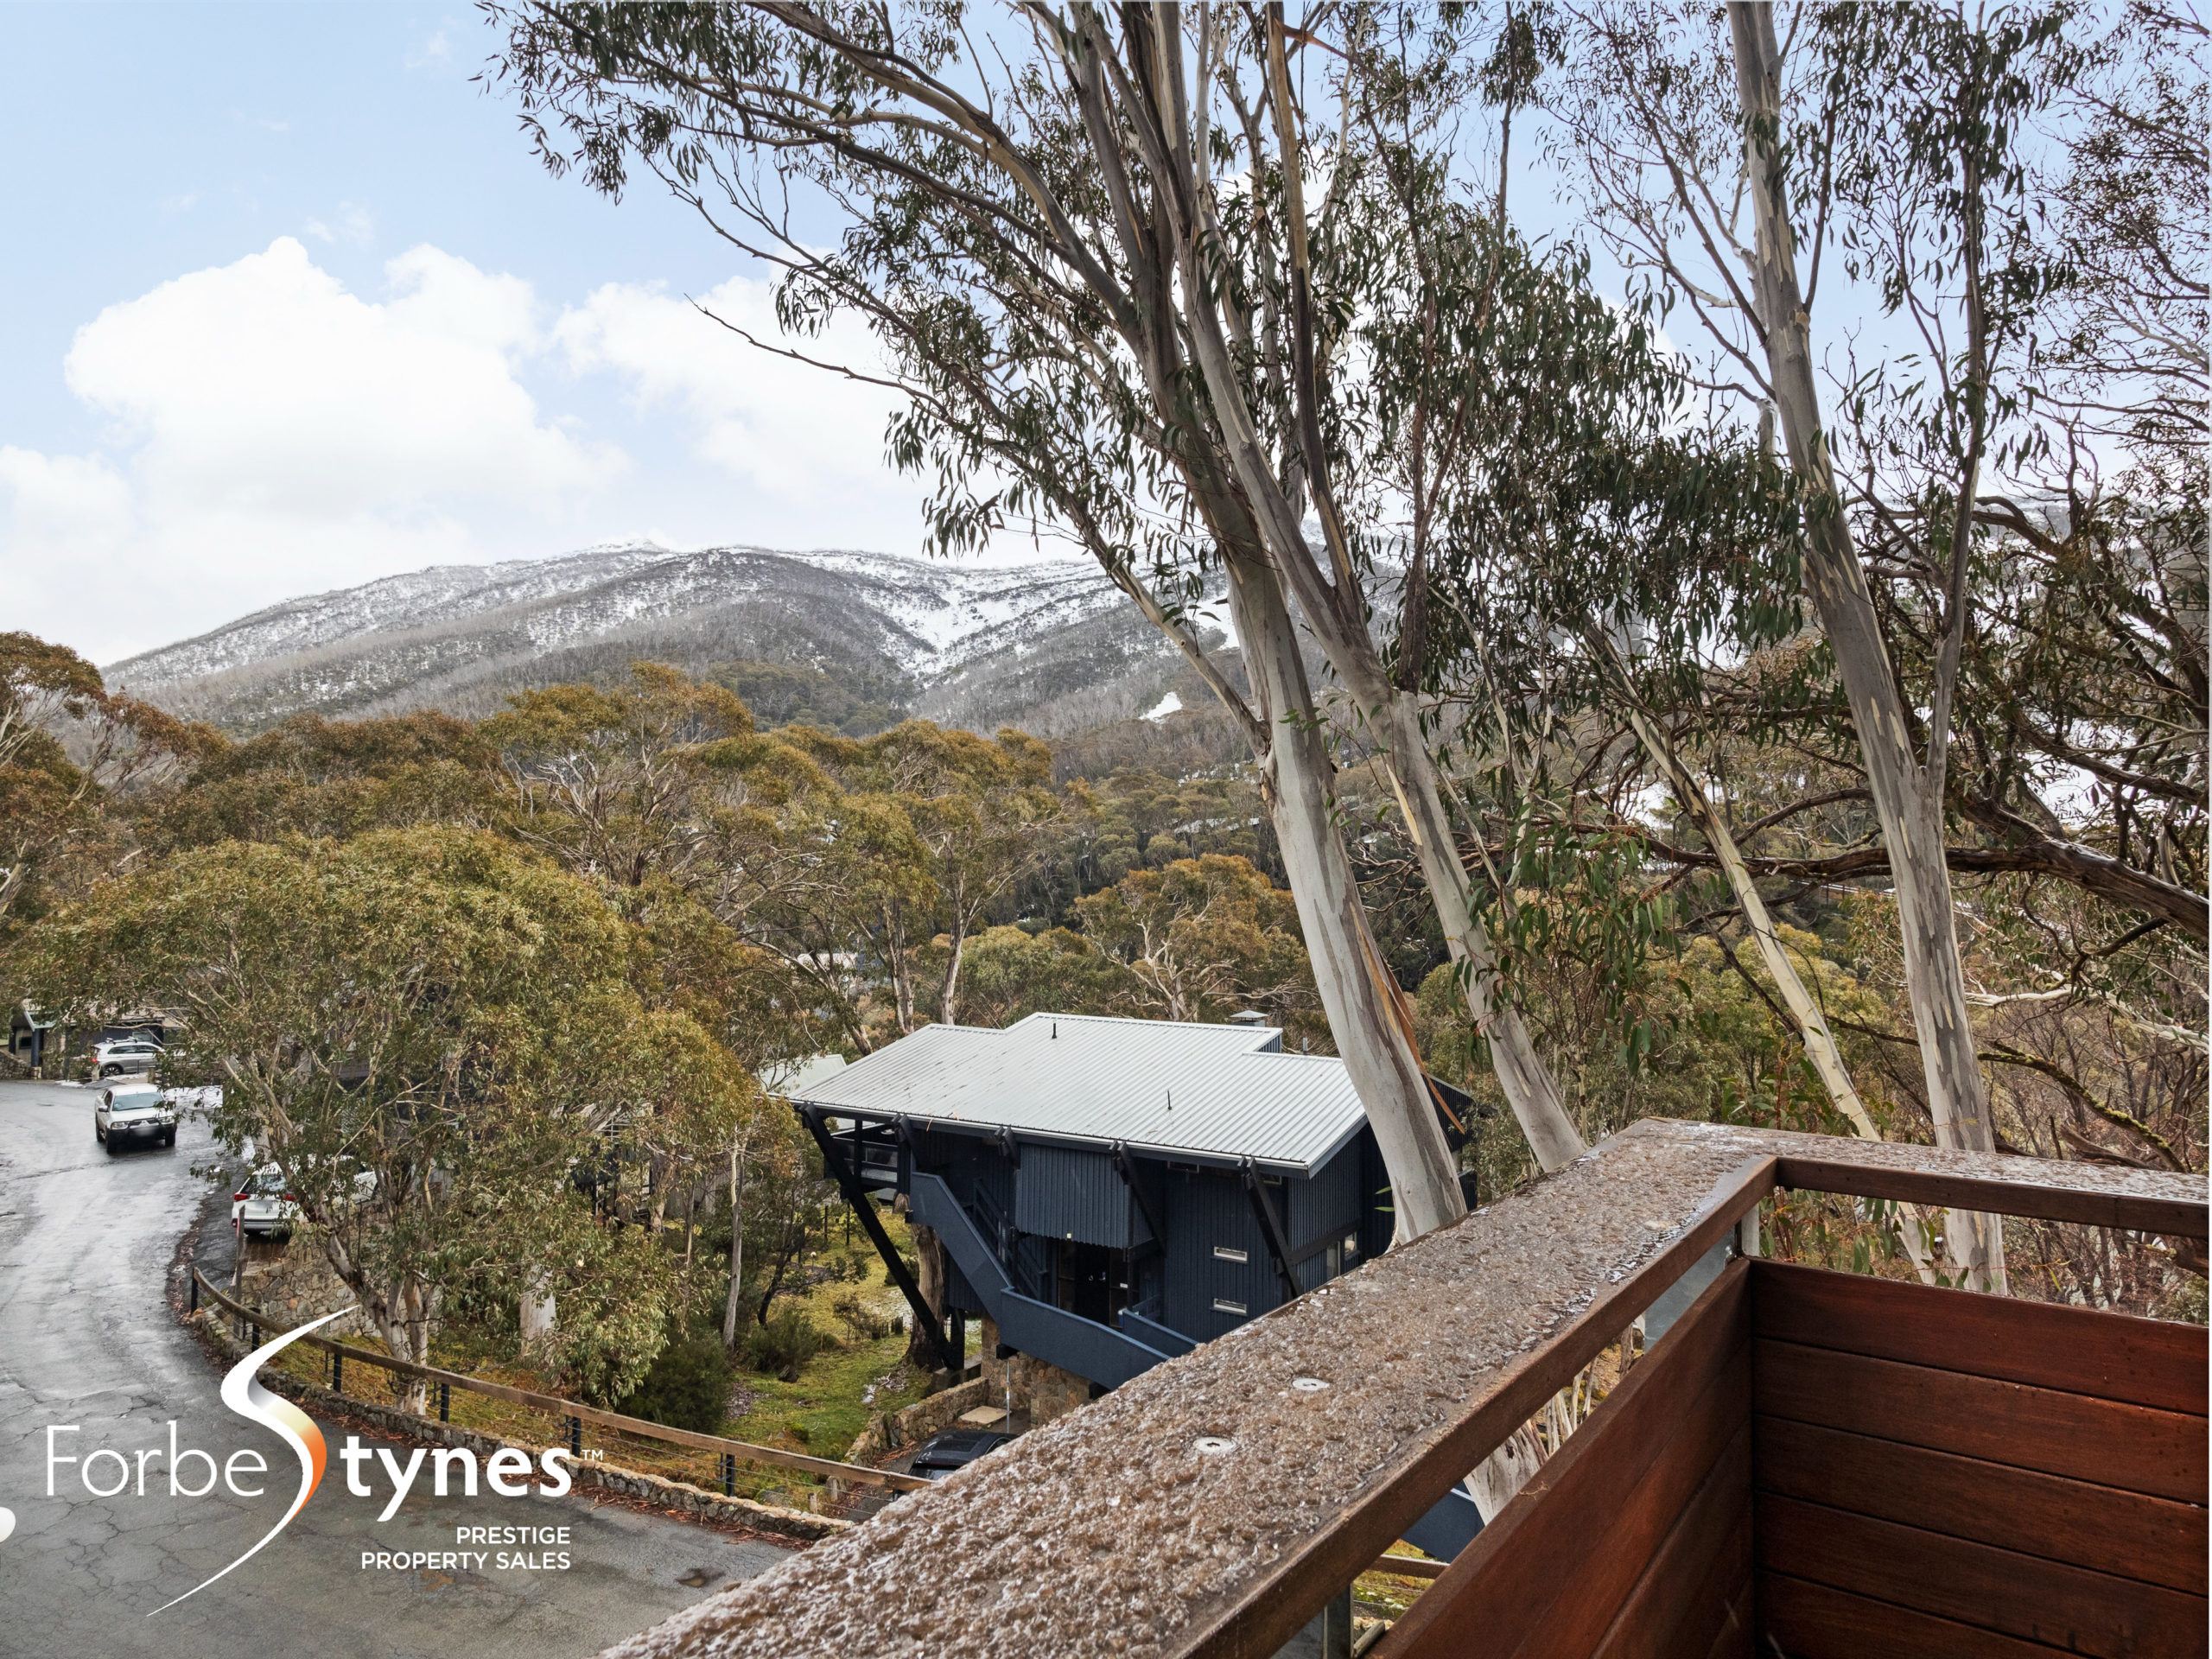 Large 5 Bedroom Lodge in the heart of Thredbo’s Central Village – Athol Lodge<br>$3,900,000